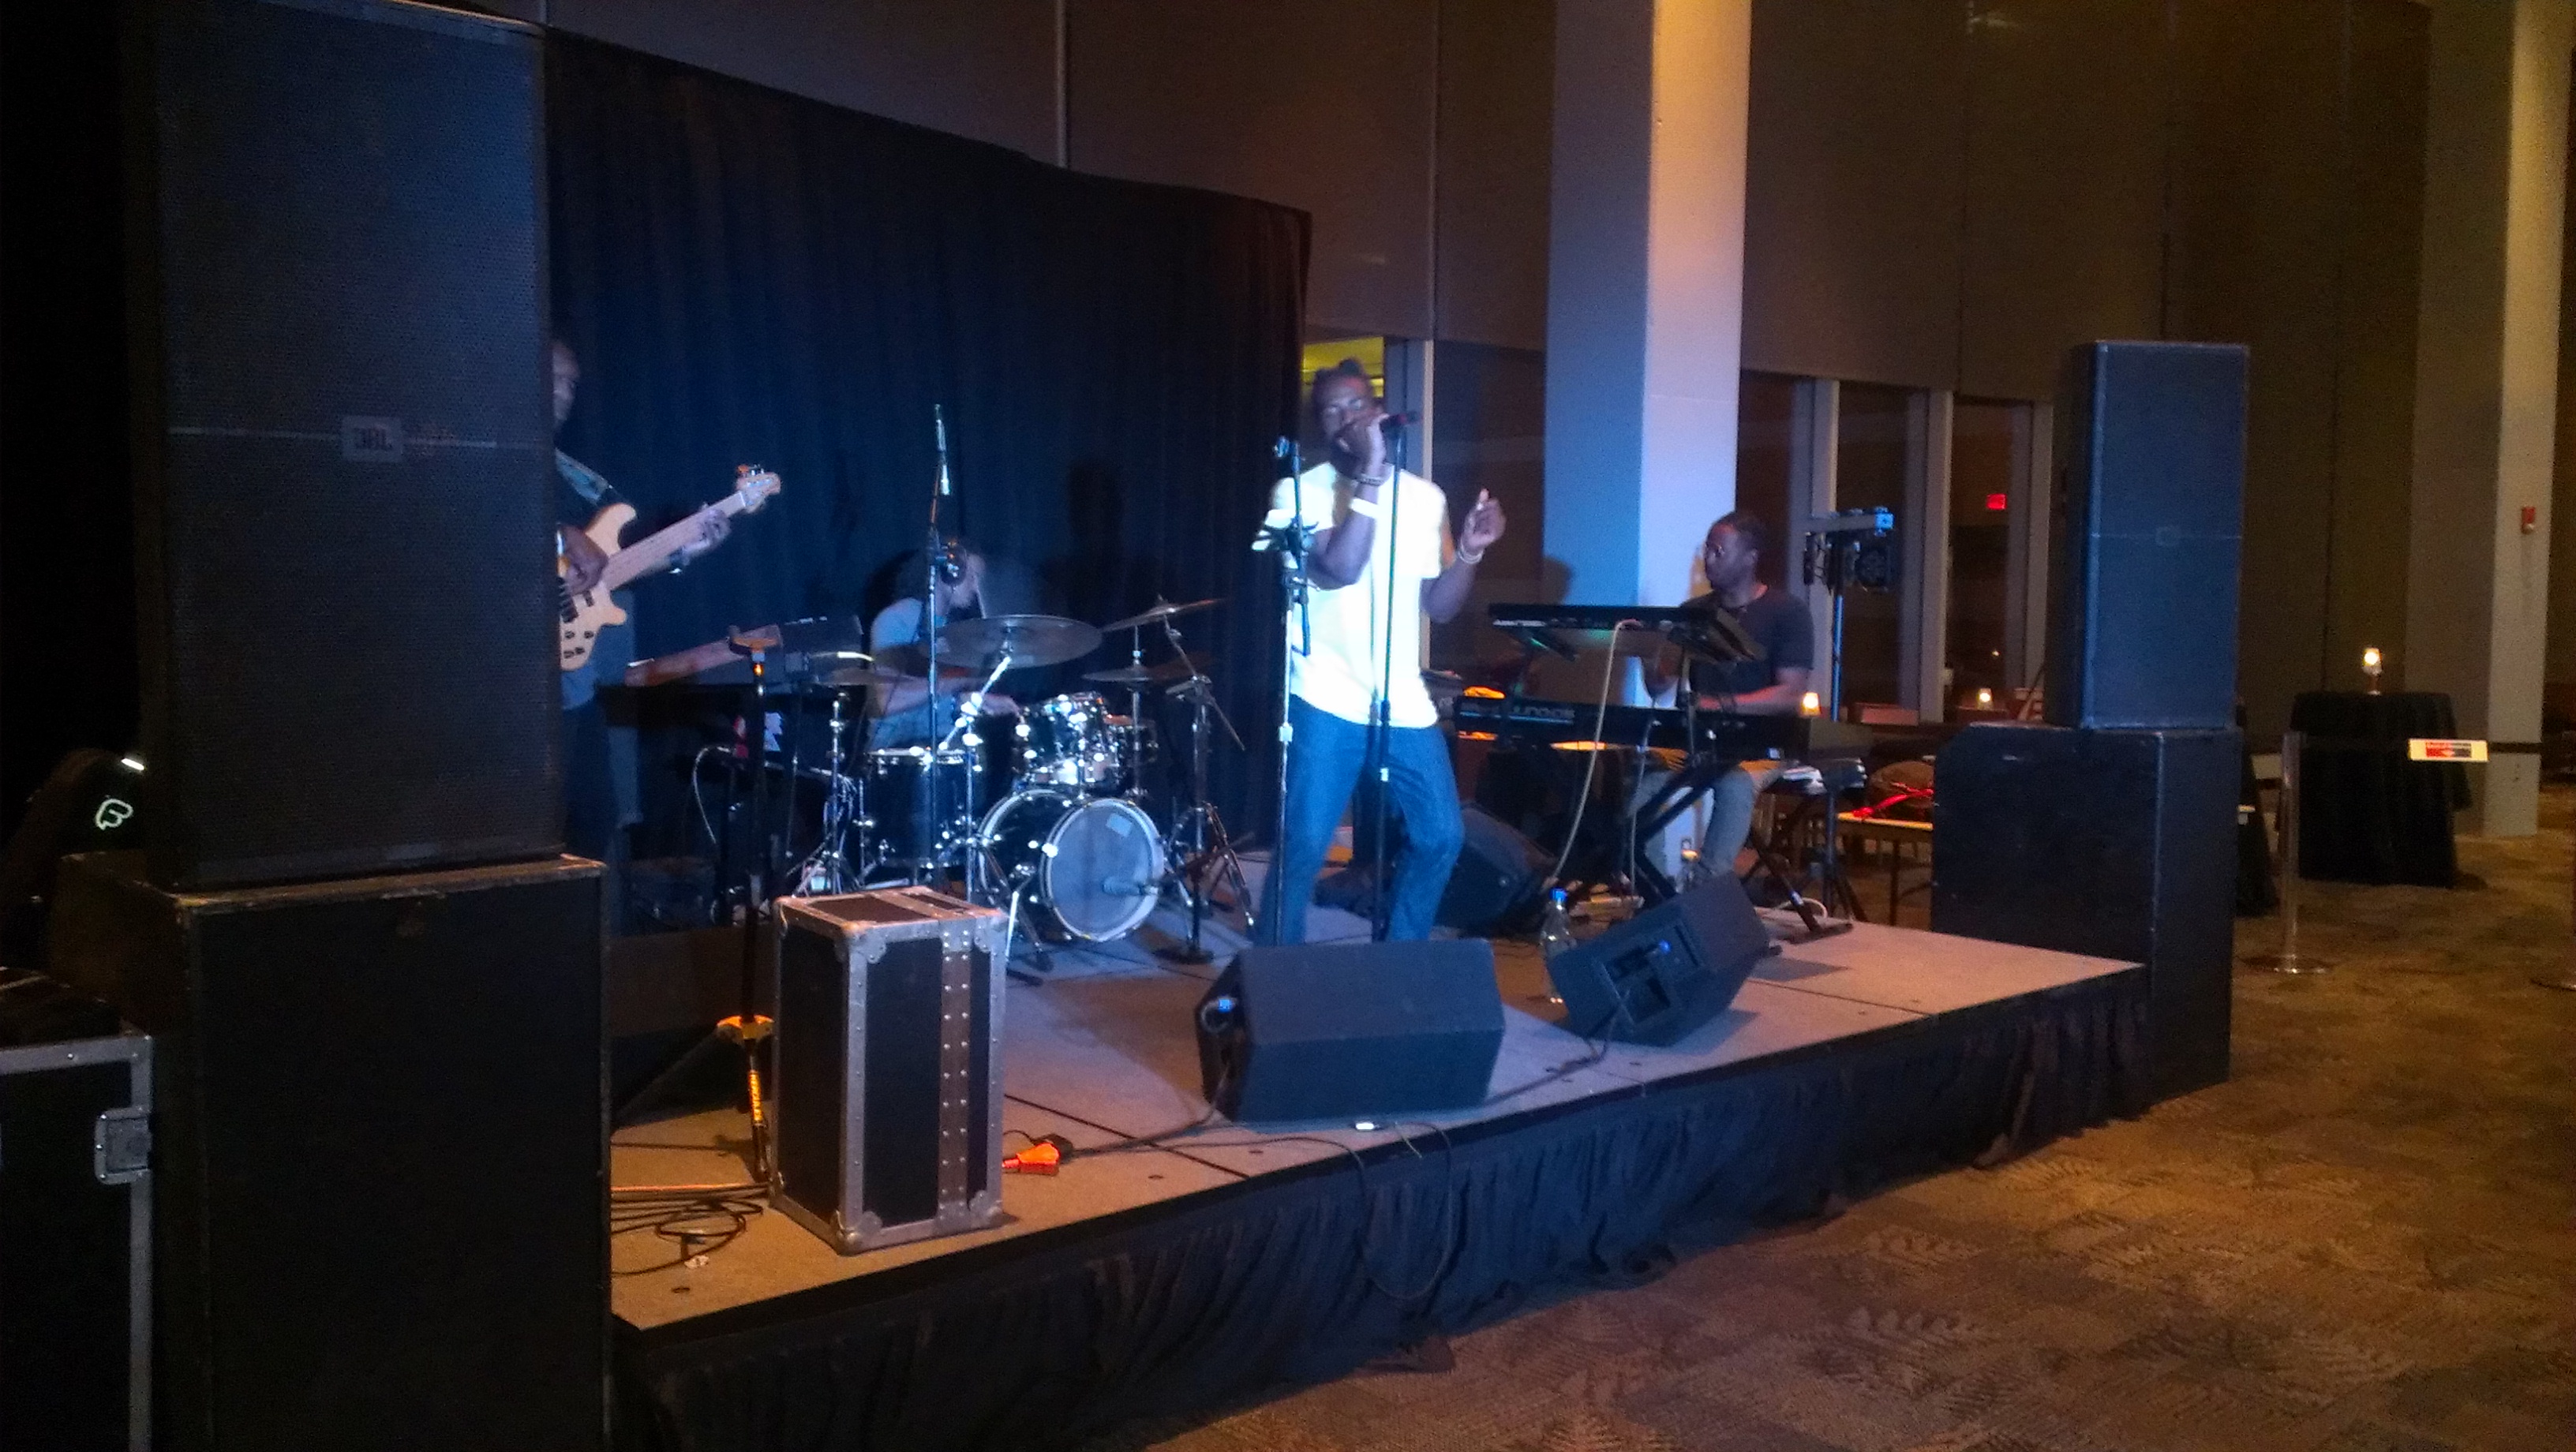 Jason JetPlane (@JasonJetMusic) with his band on the JBL SRX Single Stack @ Spectrum Center in Charlotte for CIAA 2017